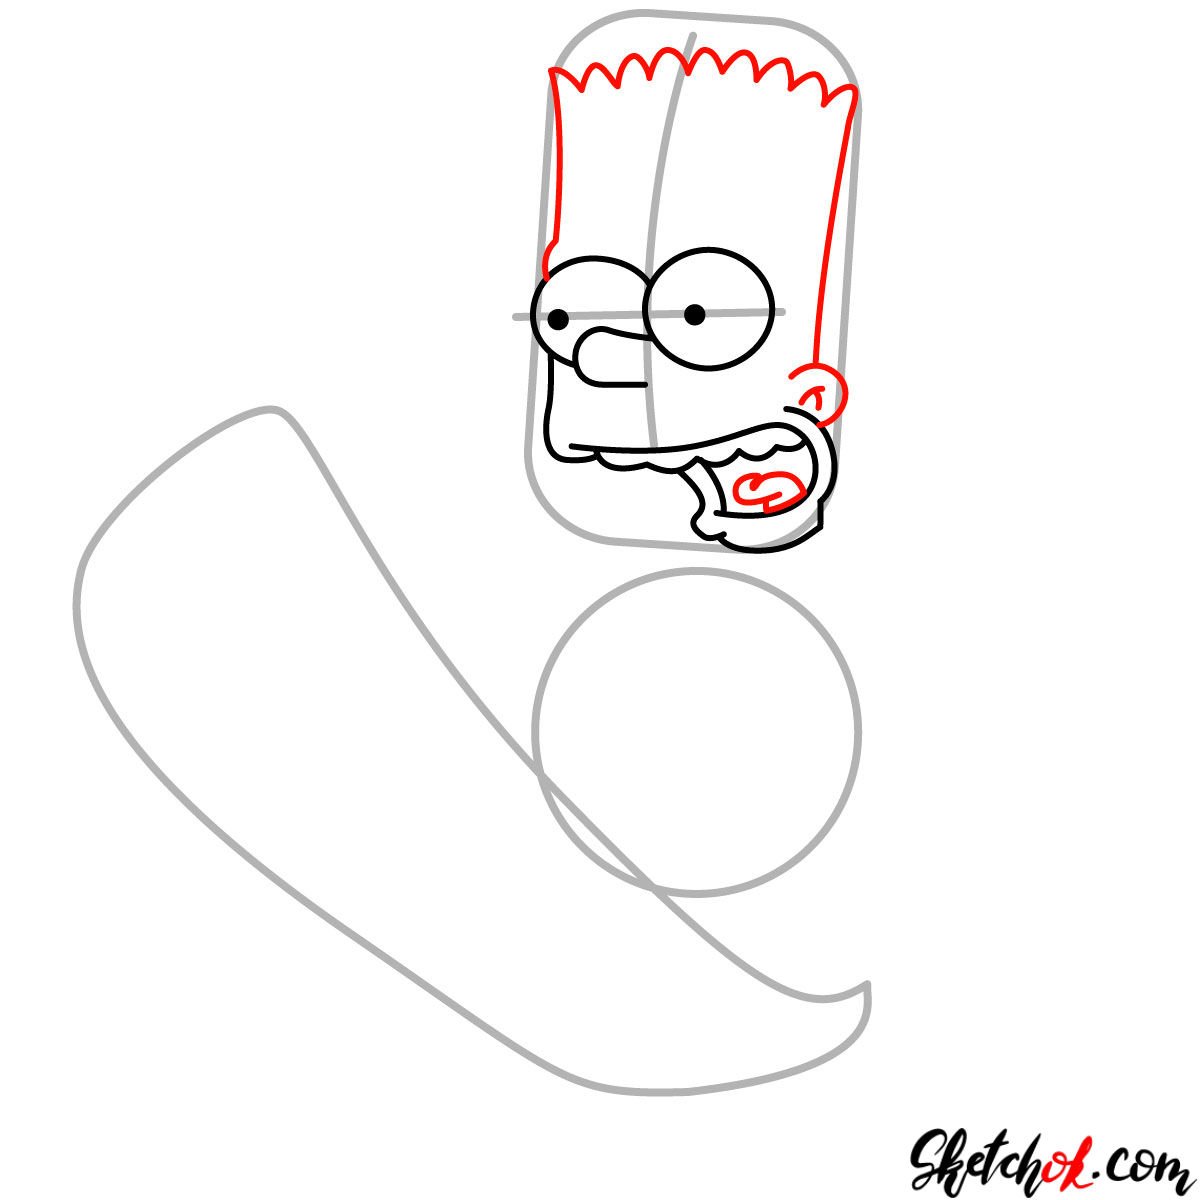 How to draw Bart Simpson on a skateboard - step 03